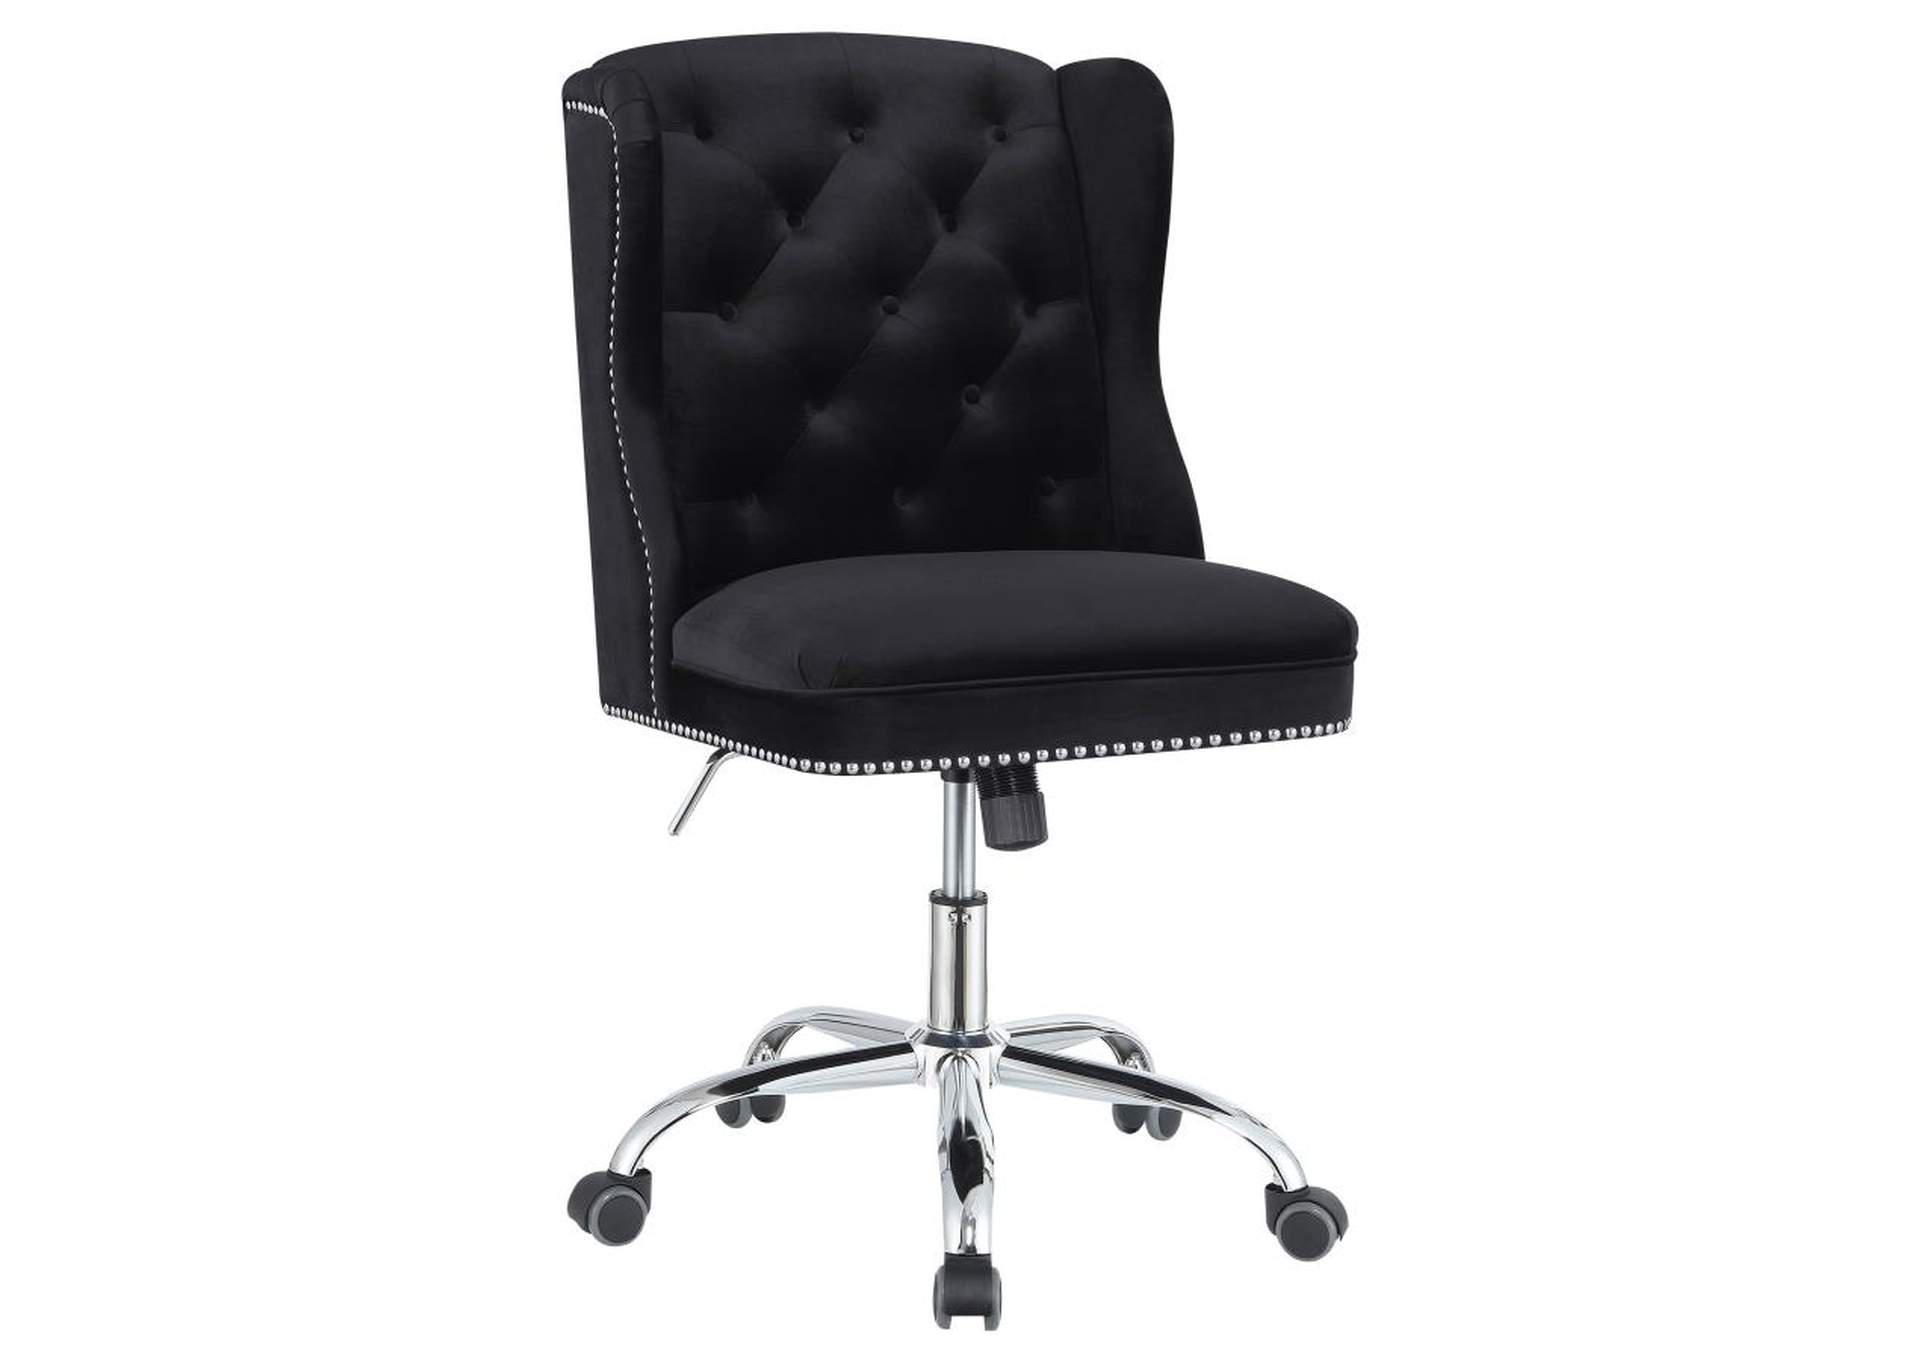 Julius Upholstered Tufted Office Chair Black and Chrome,Coaster Furniture